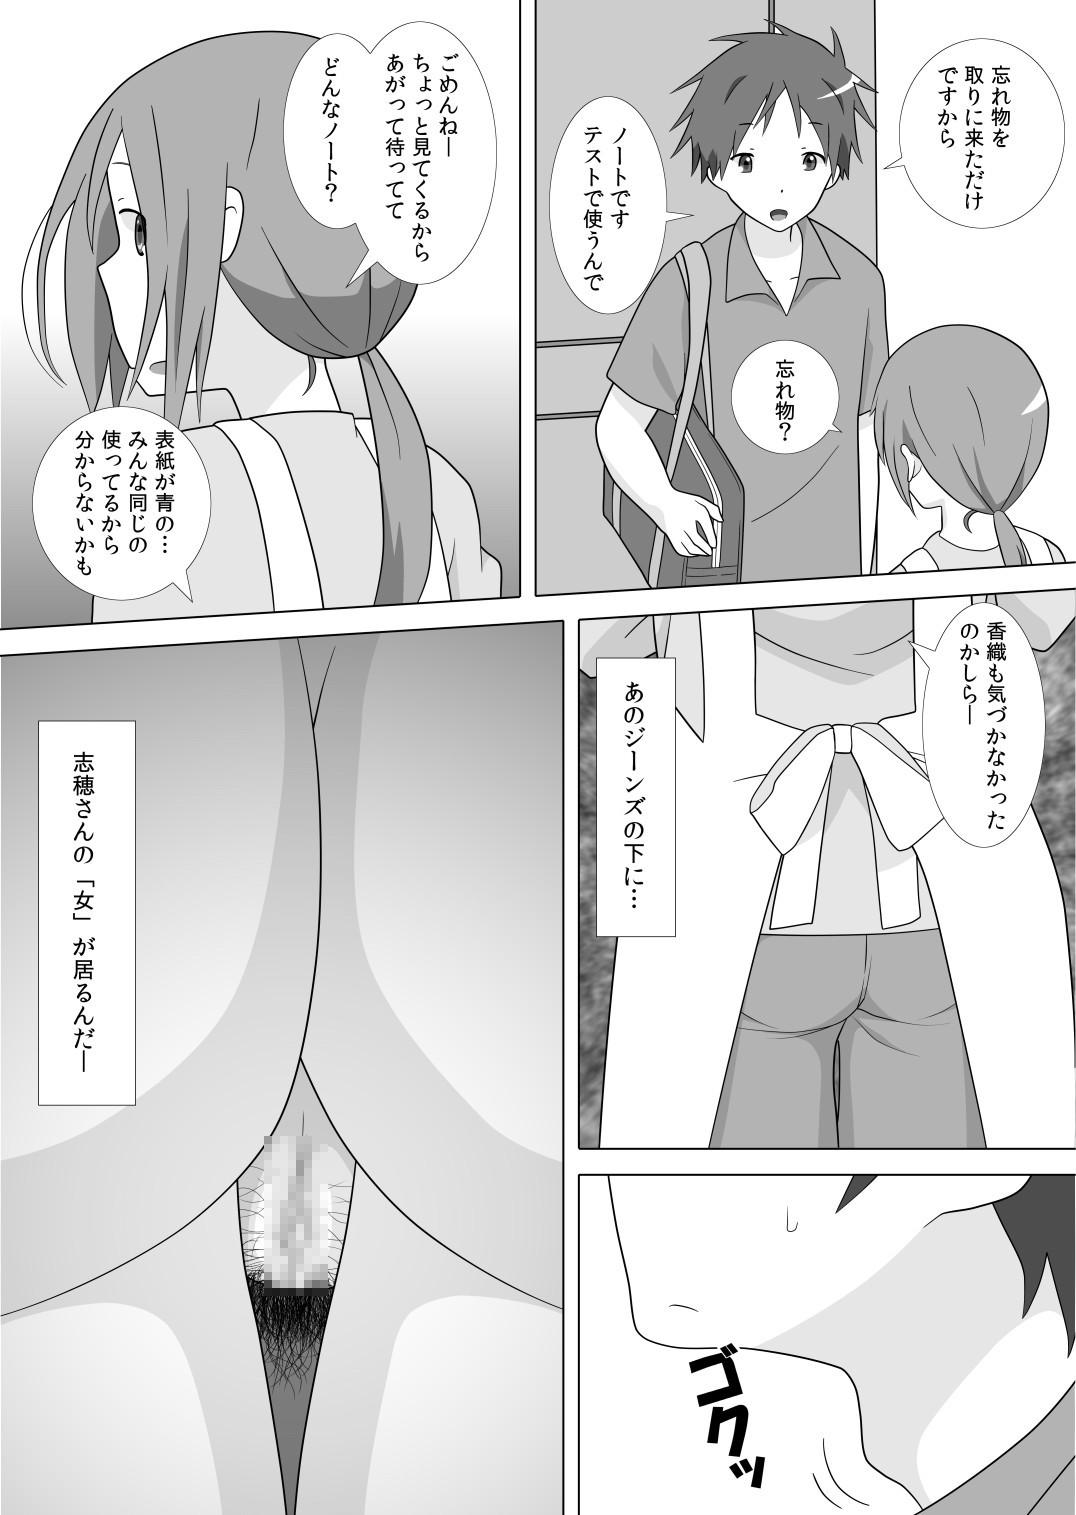 Officesex さぁこれから Episode: 1 - One week friends Pay - Page 5